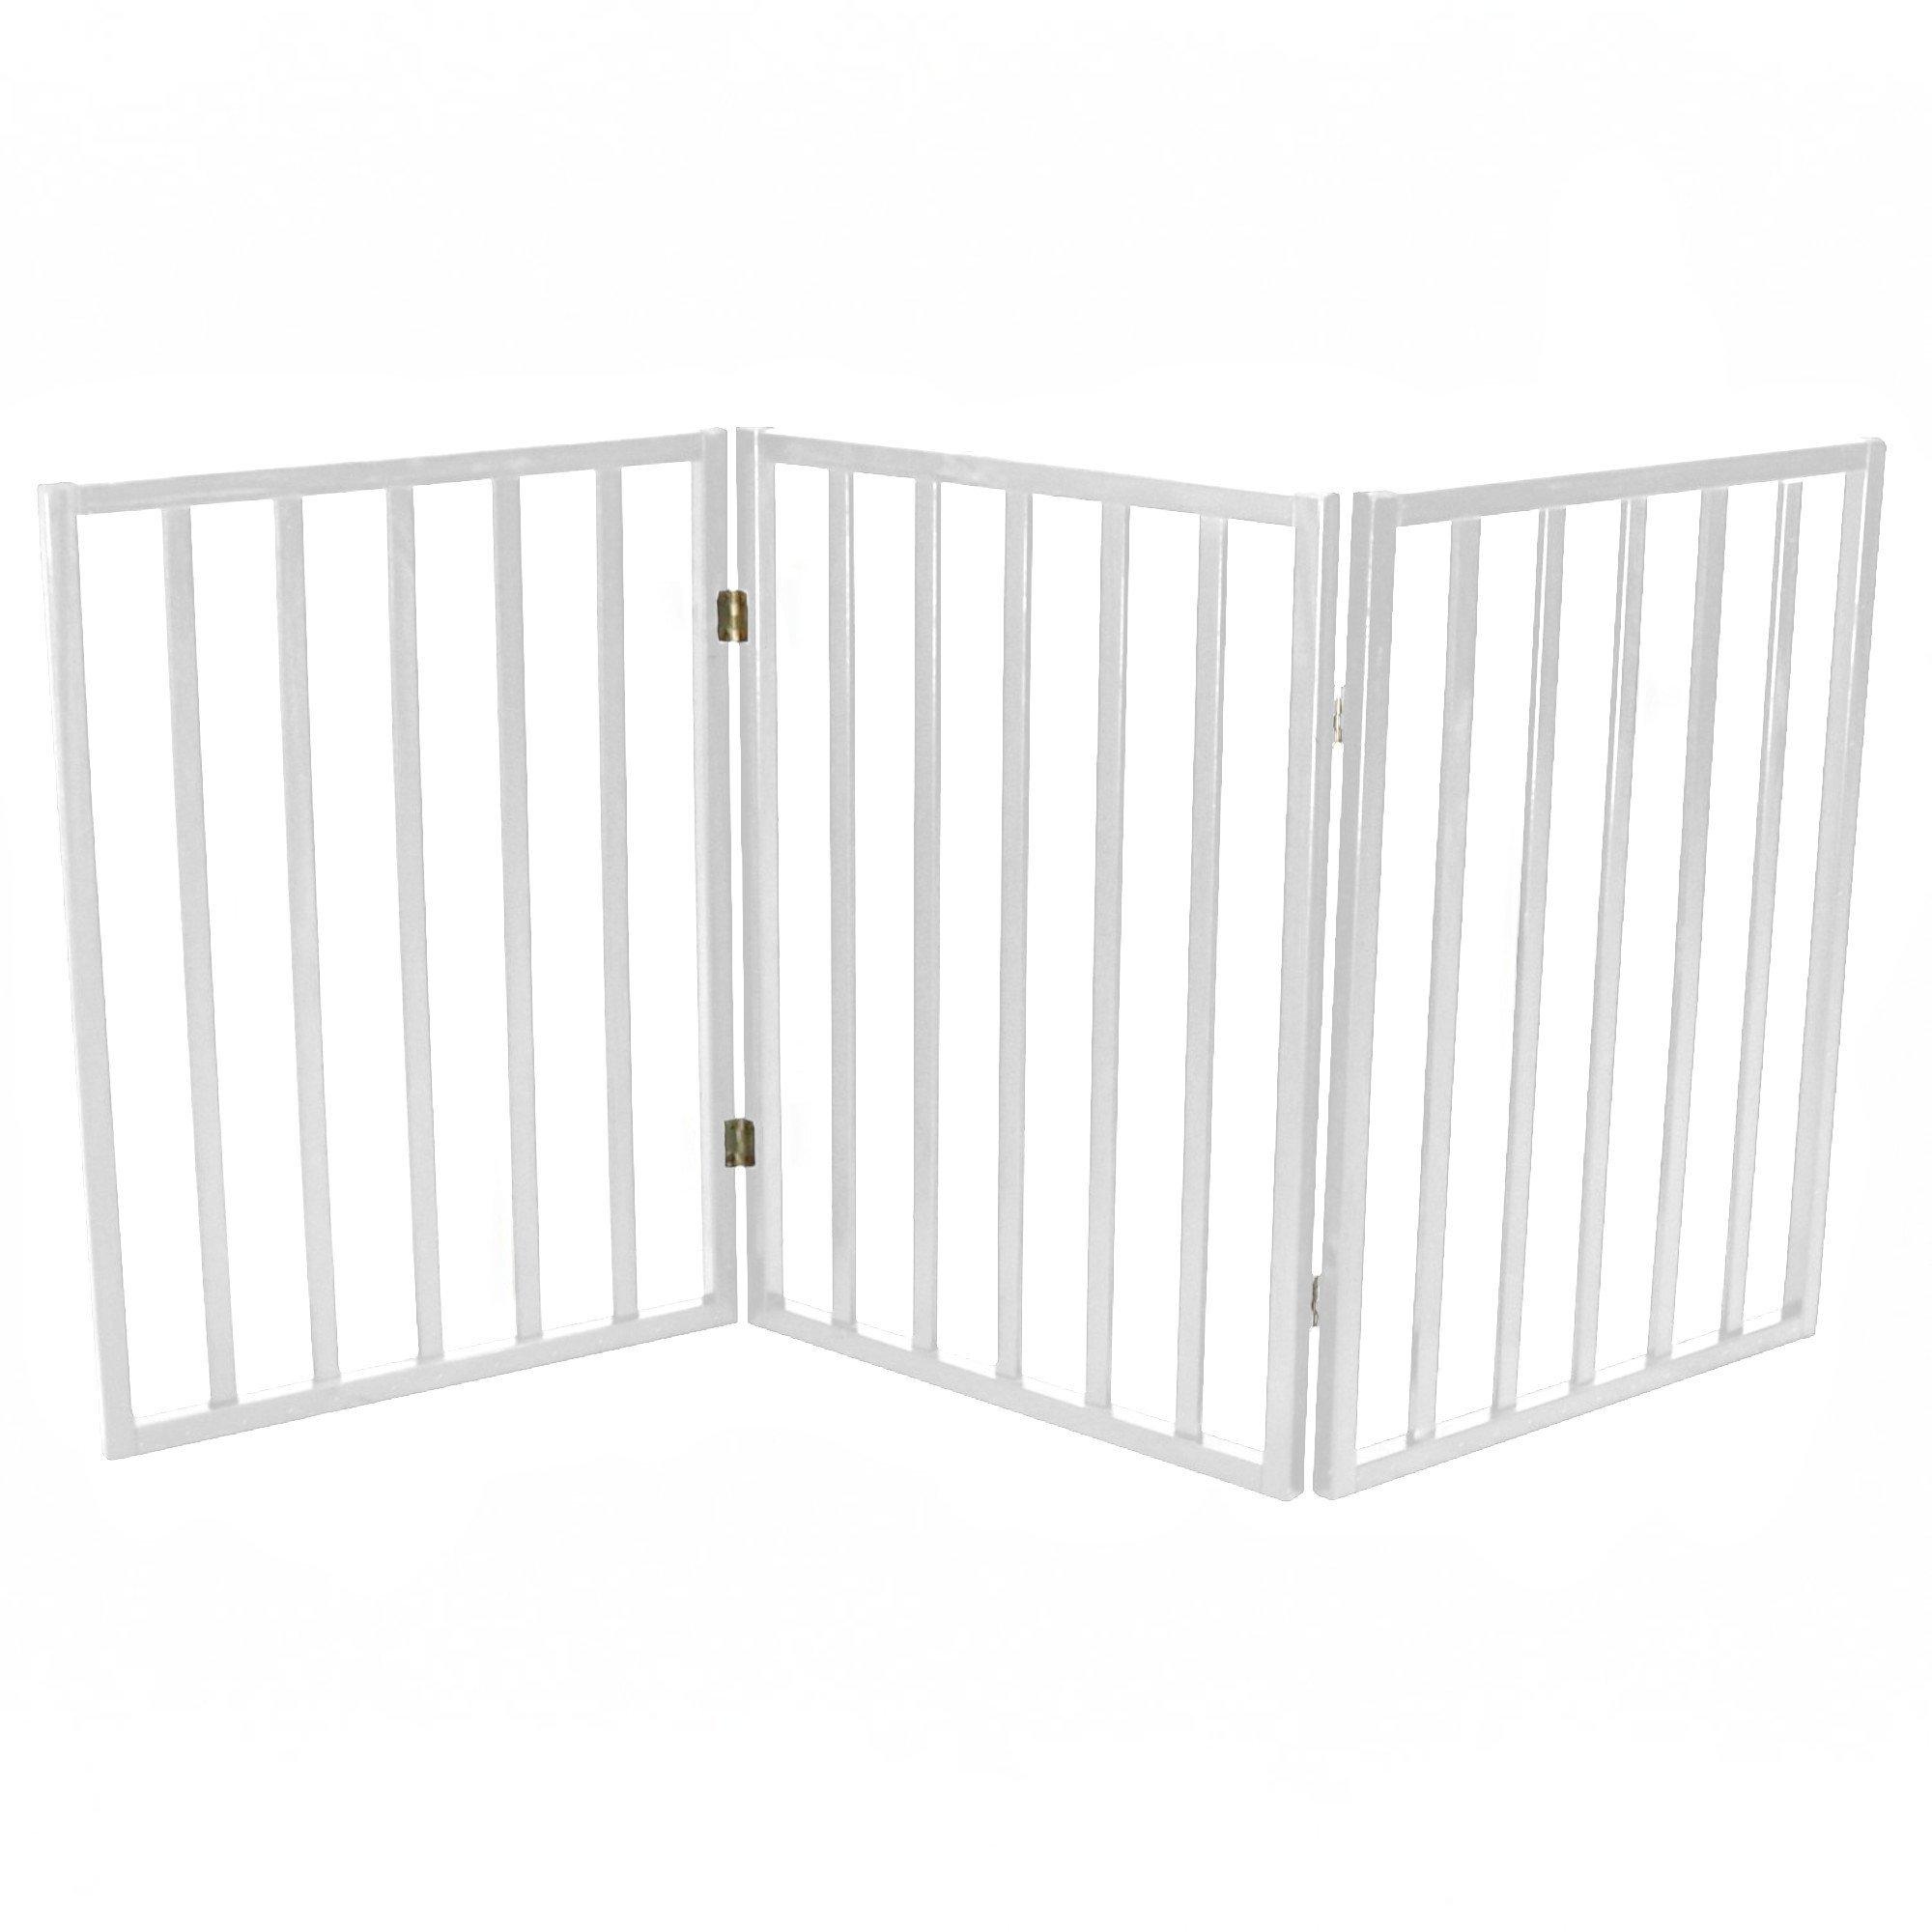 Oypla  White Dog Safety Folding Wooden Pet Gate Portable Indoor Barrier